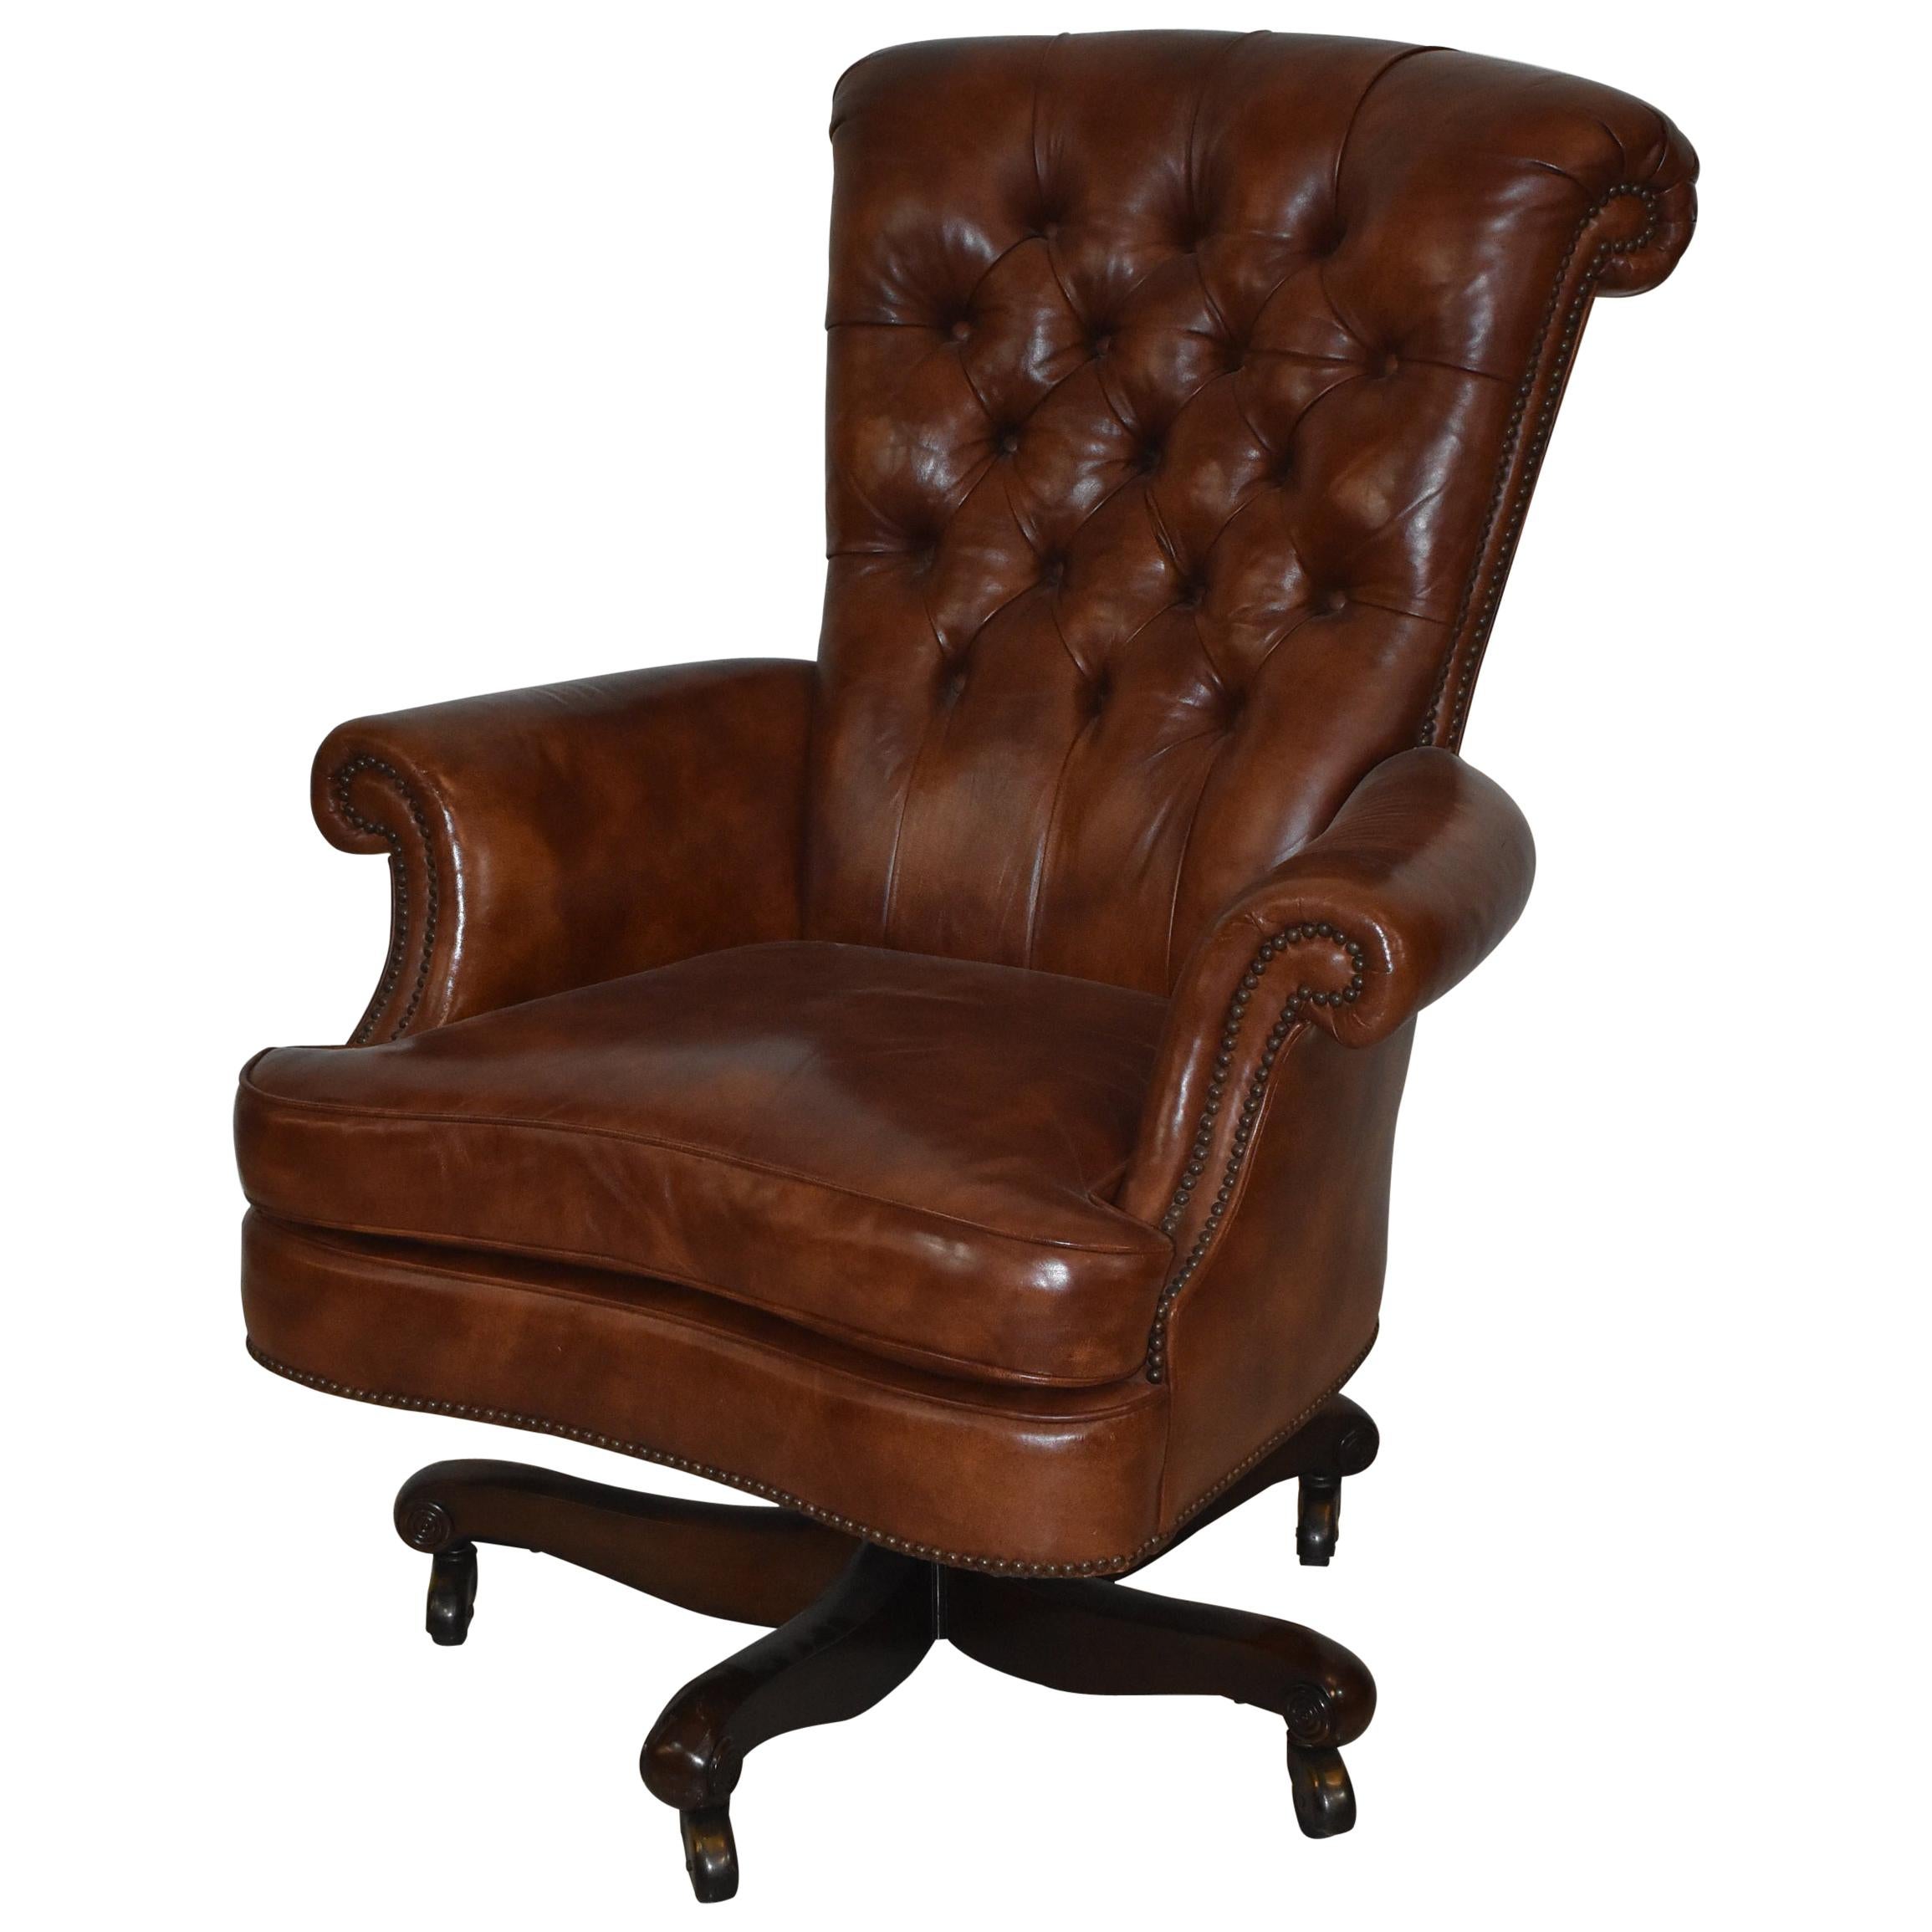 Baker Furniture Tufted Brown Leather Desk Office Chair